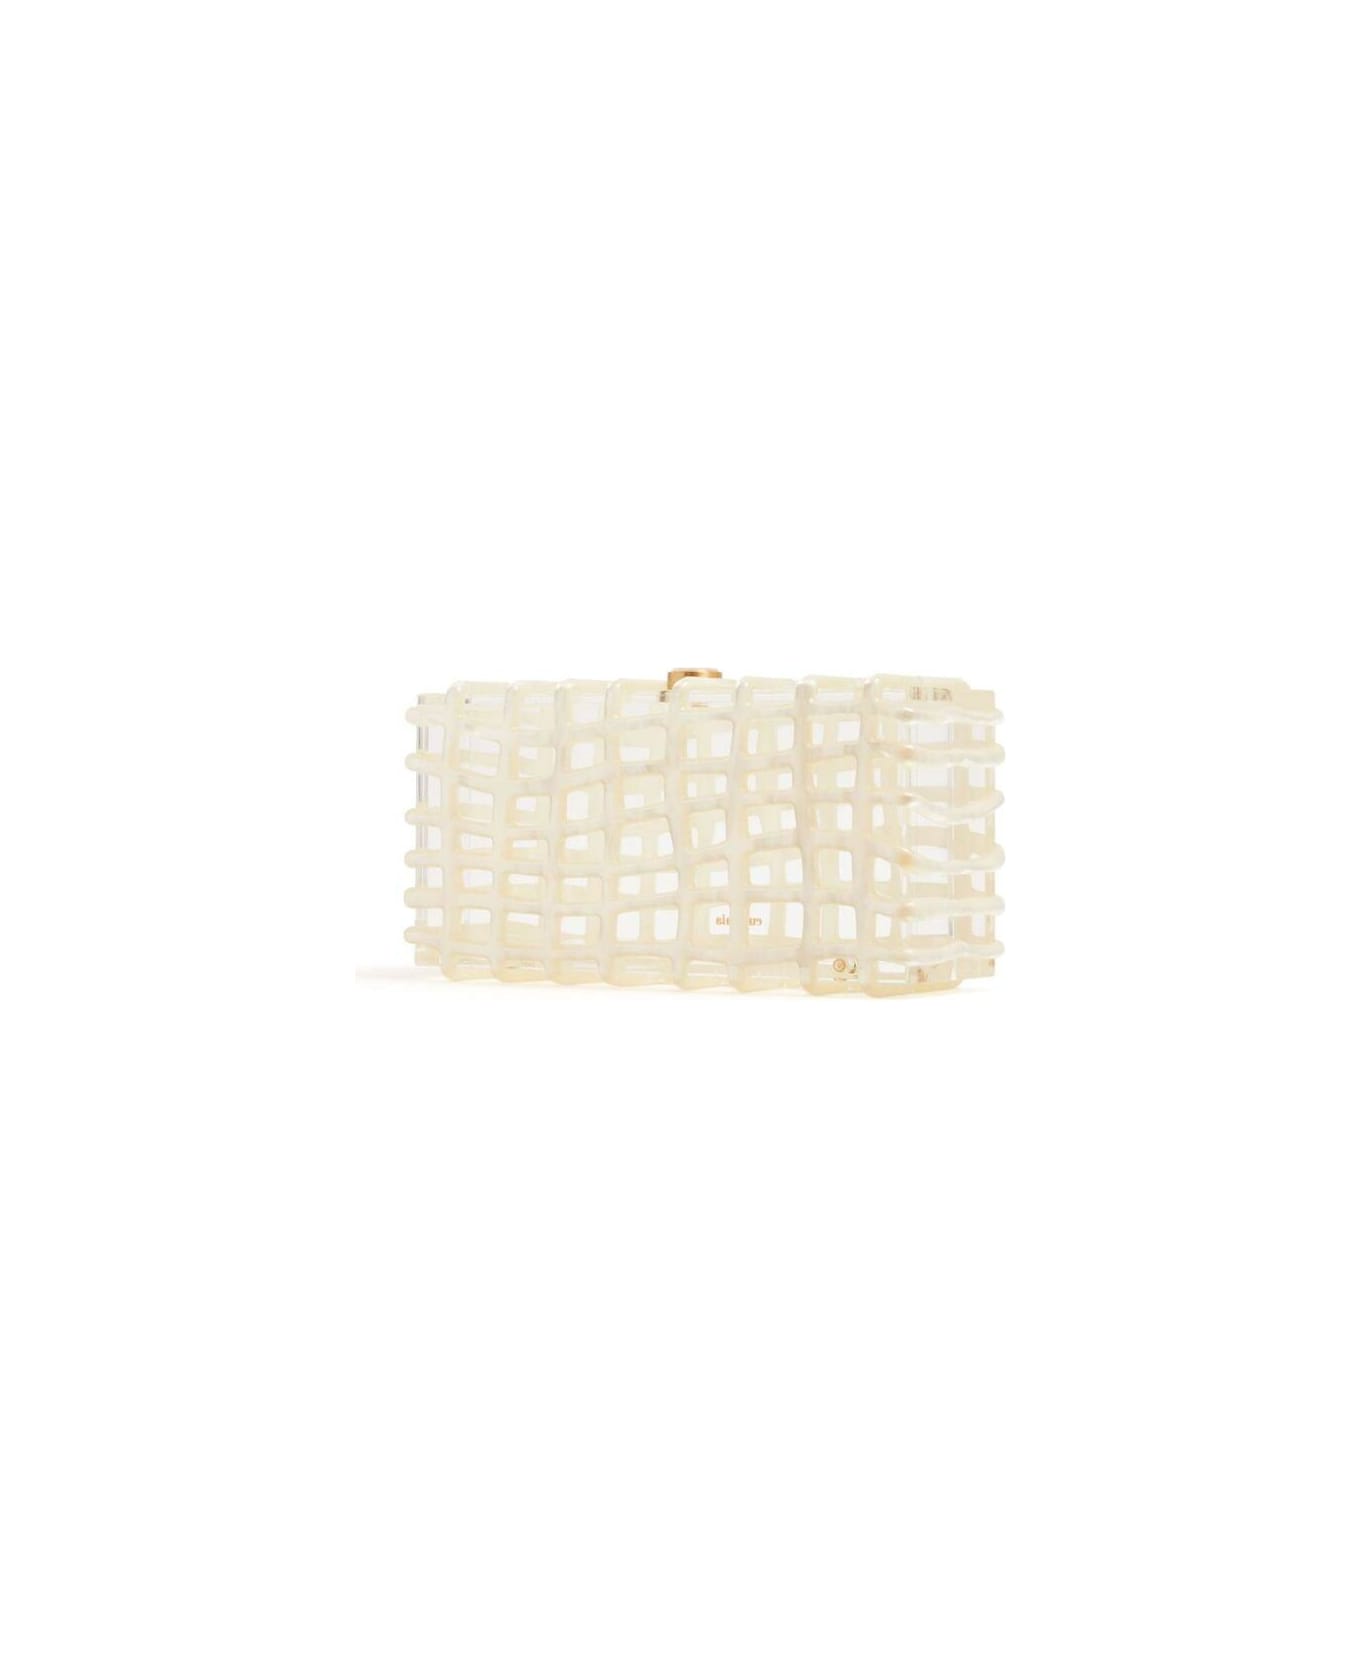 Cult Gaia Rina Logo Detailed Clutch Bag - IVORY クラッチバッグ